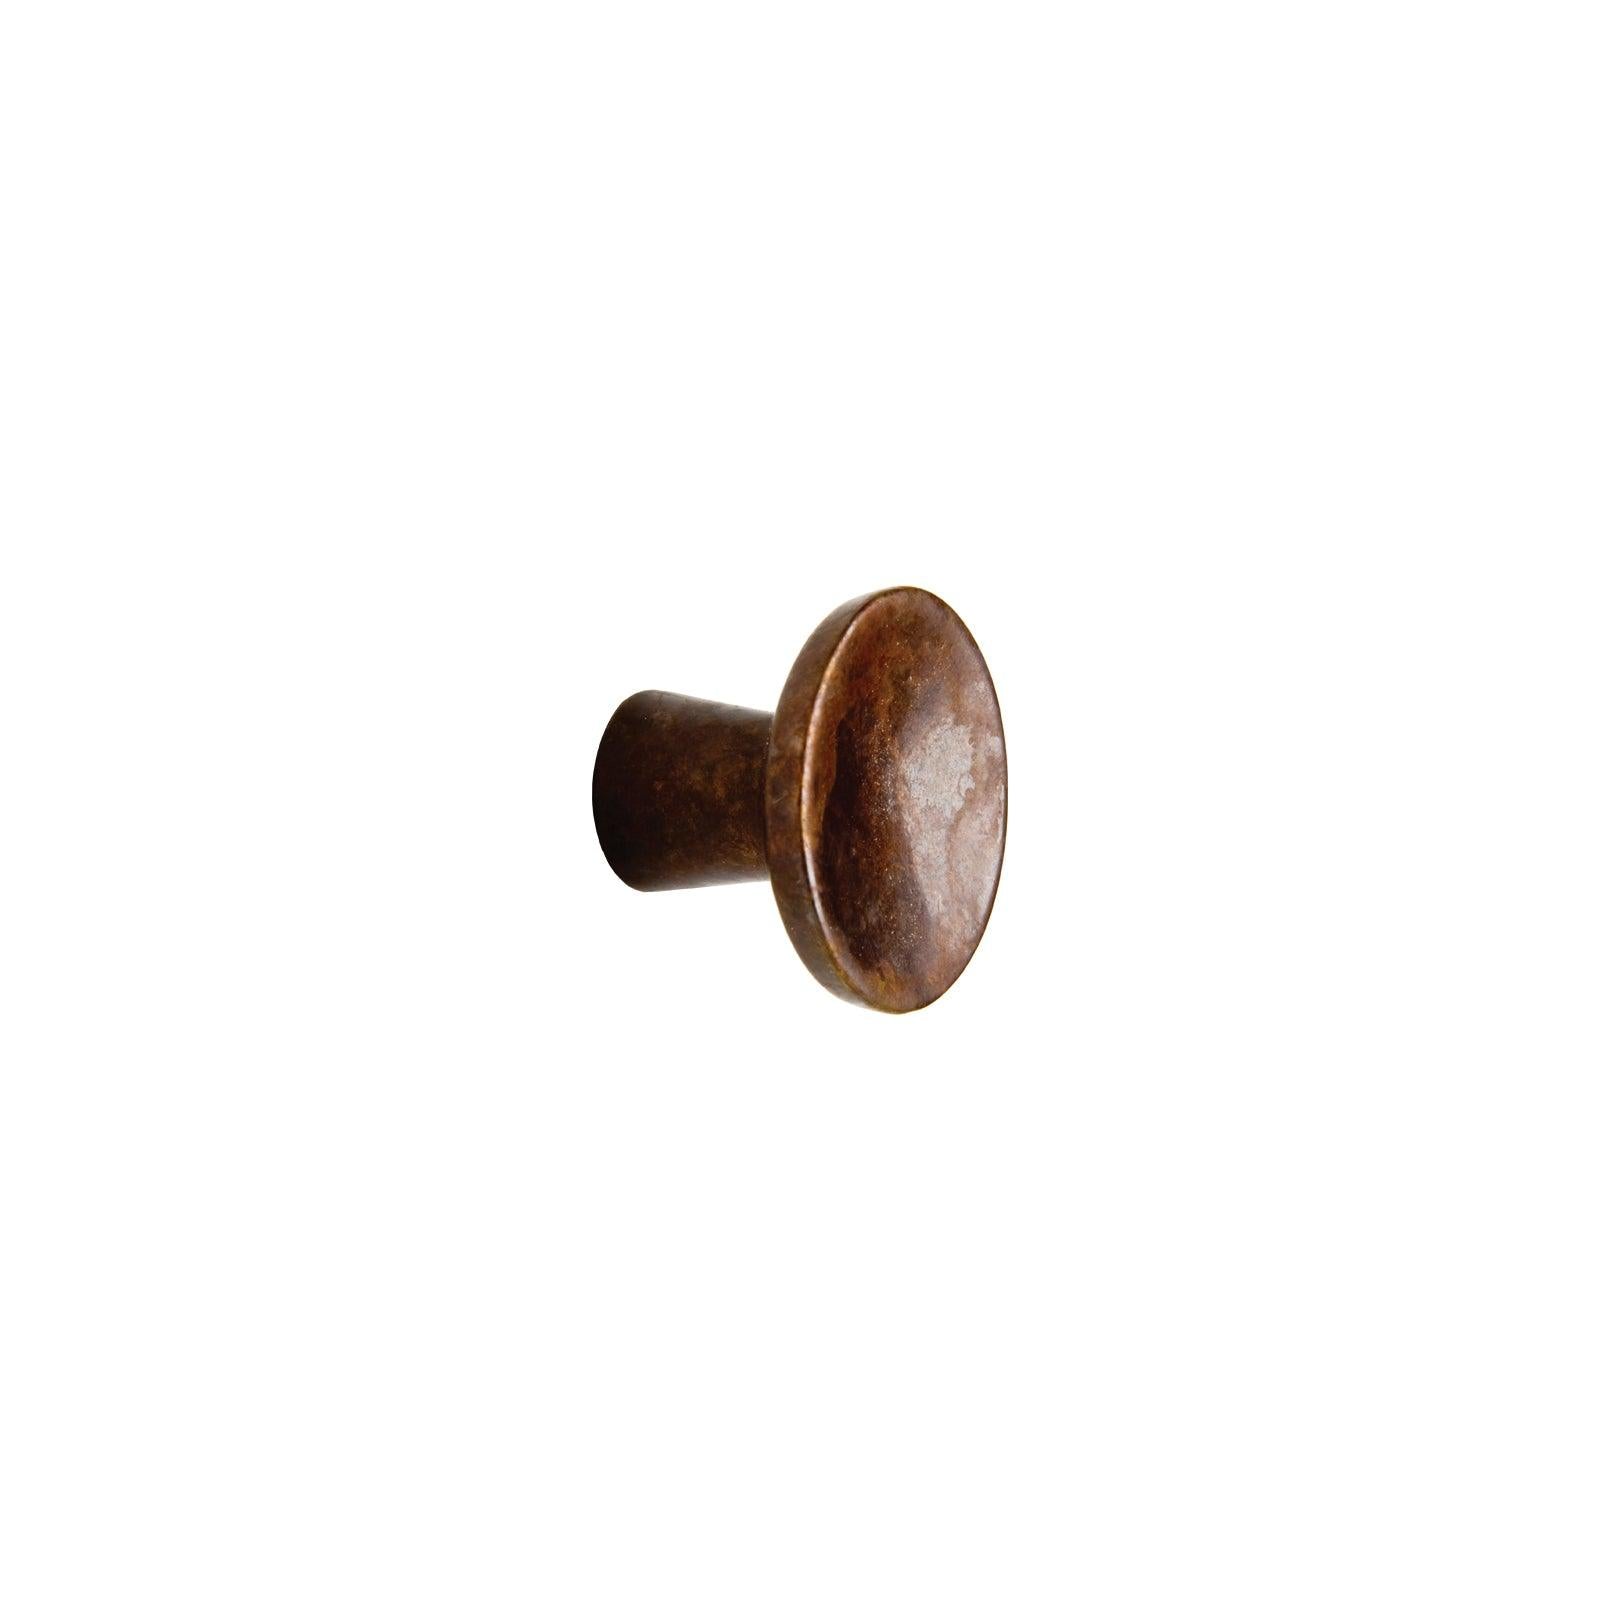 Rocky Mountain Cabinet Brut Knob CK20013 by Ted Boerner - Hardware by Design